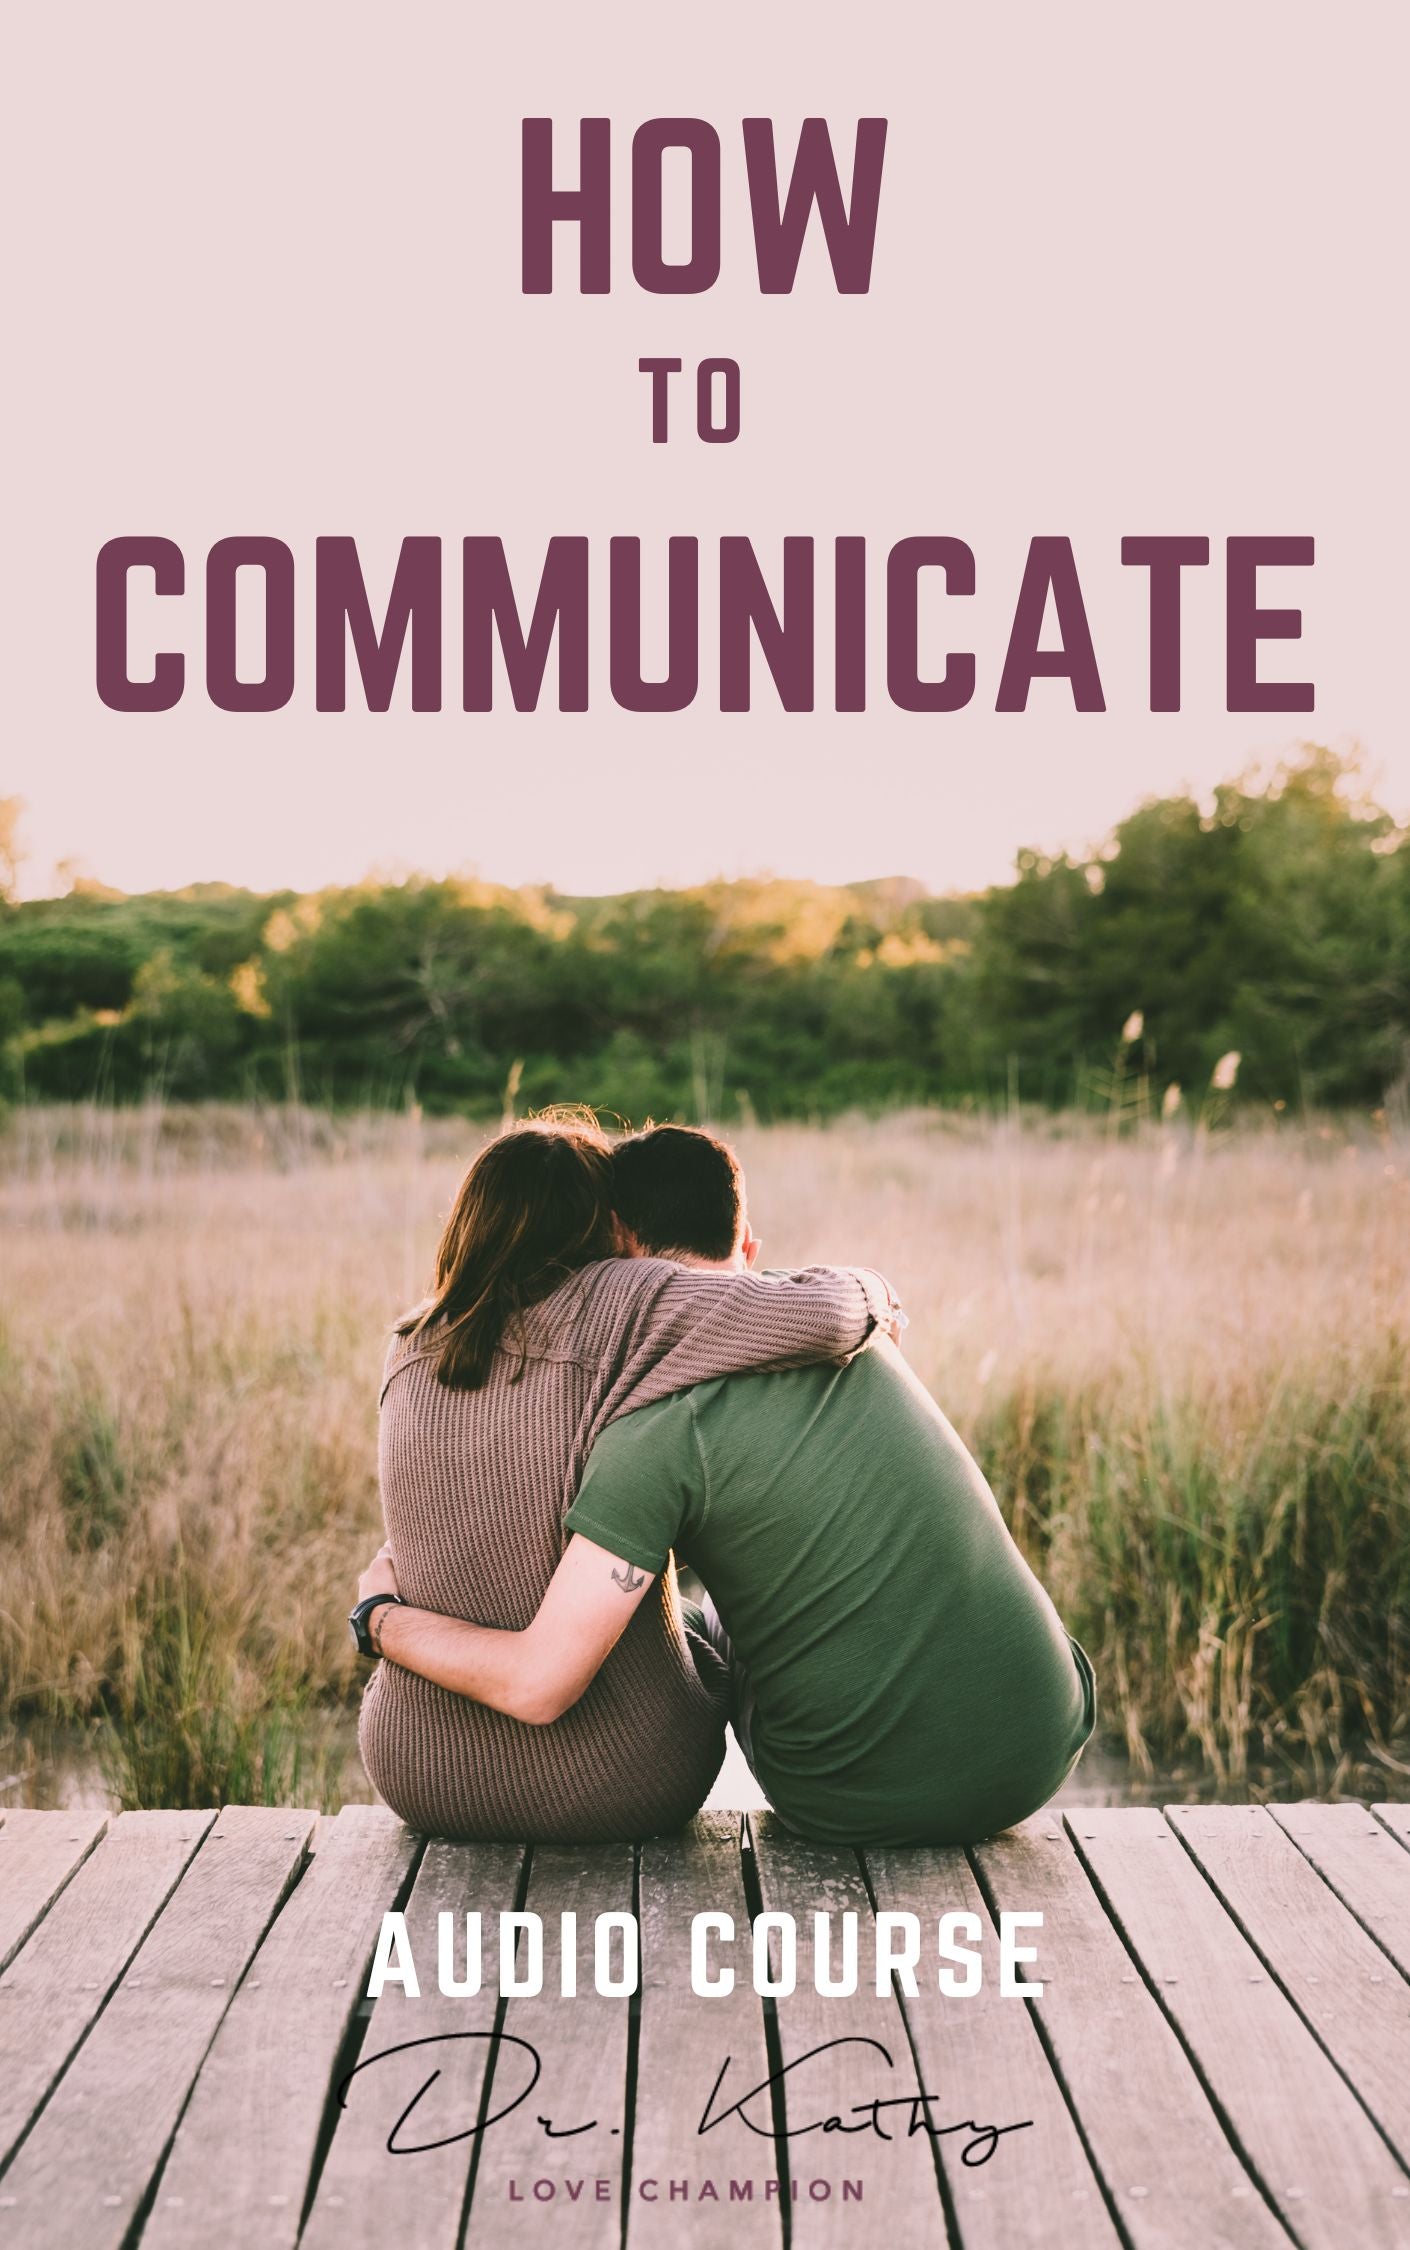 How To Communicate - The Do List - Audio Lesson